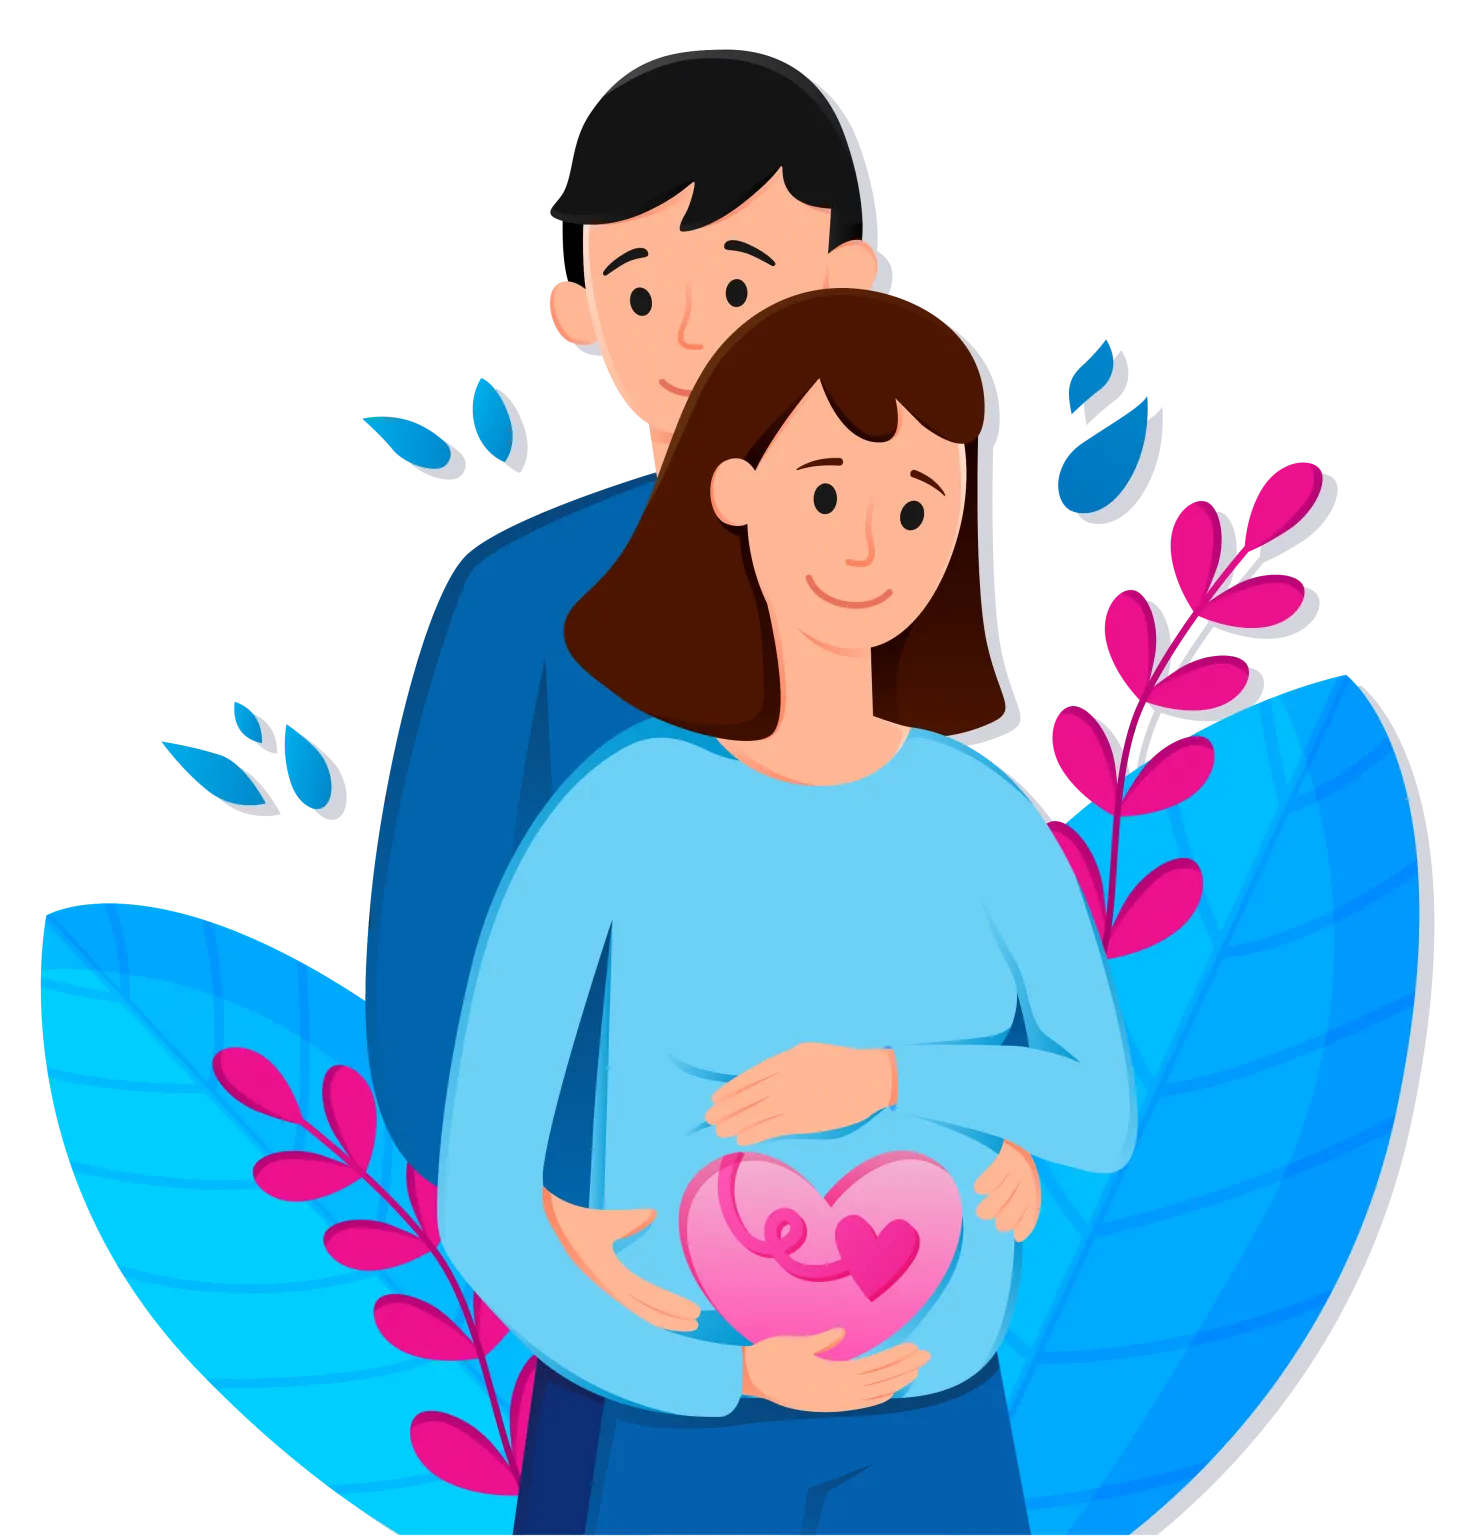 Illustration of a couple where the mother is pregnant and the father hugs her from behind